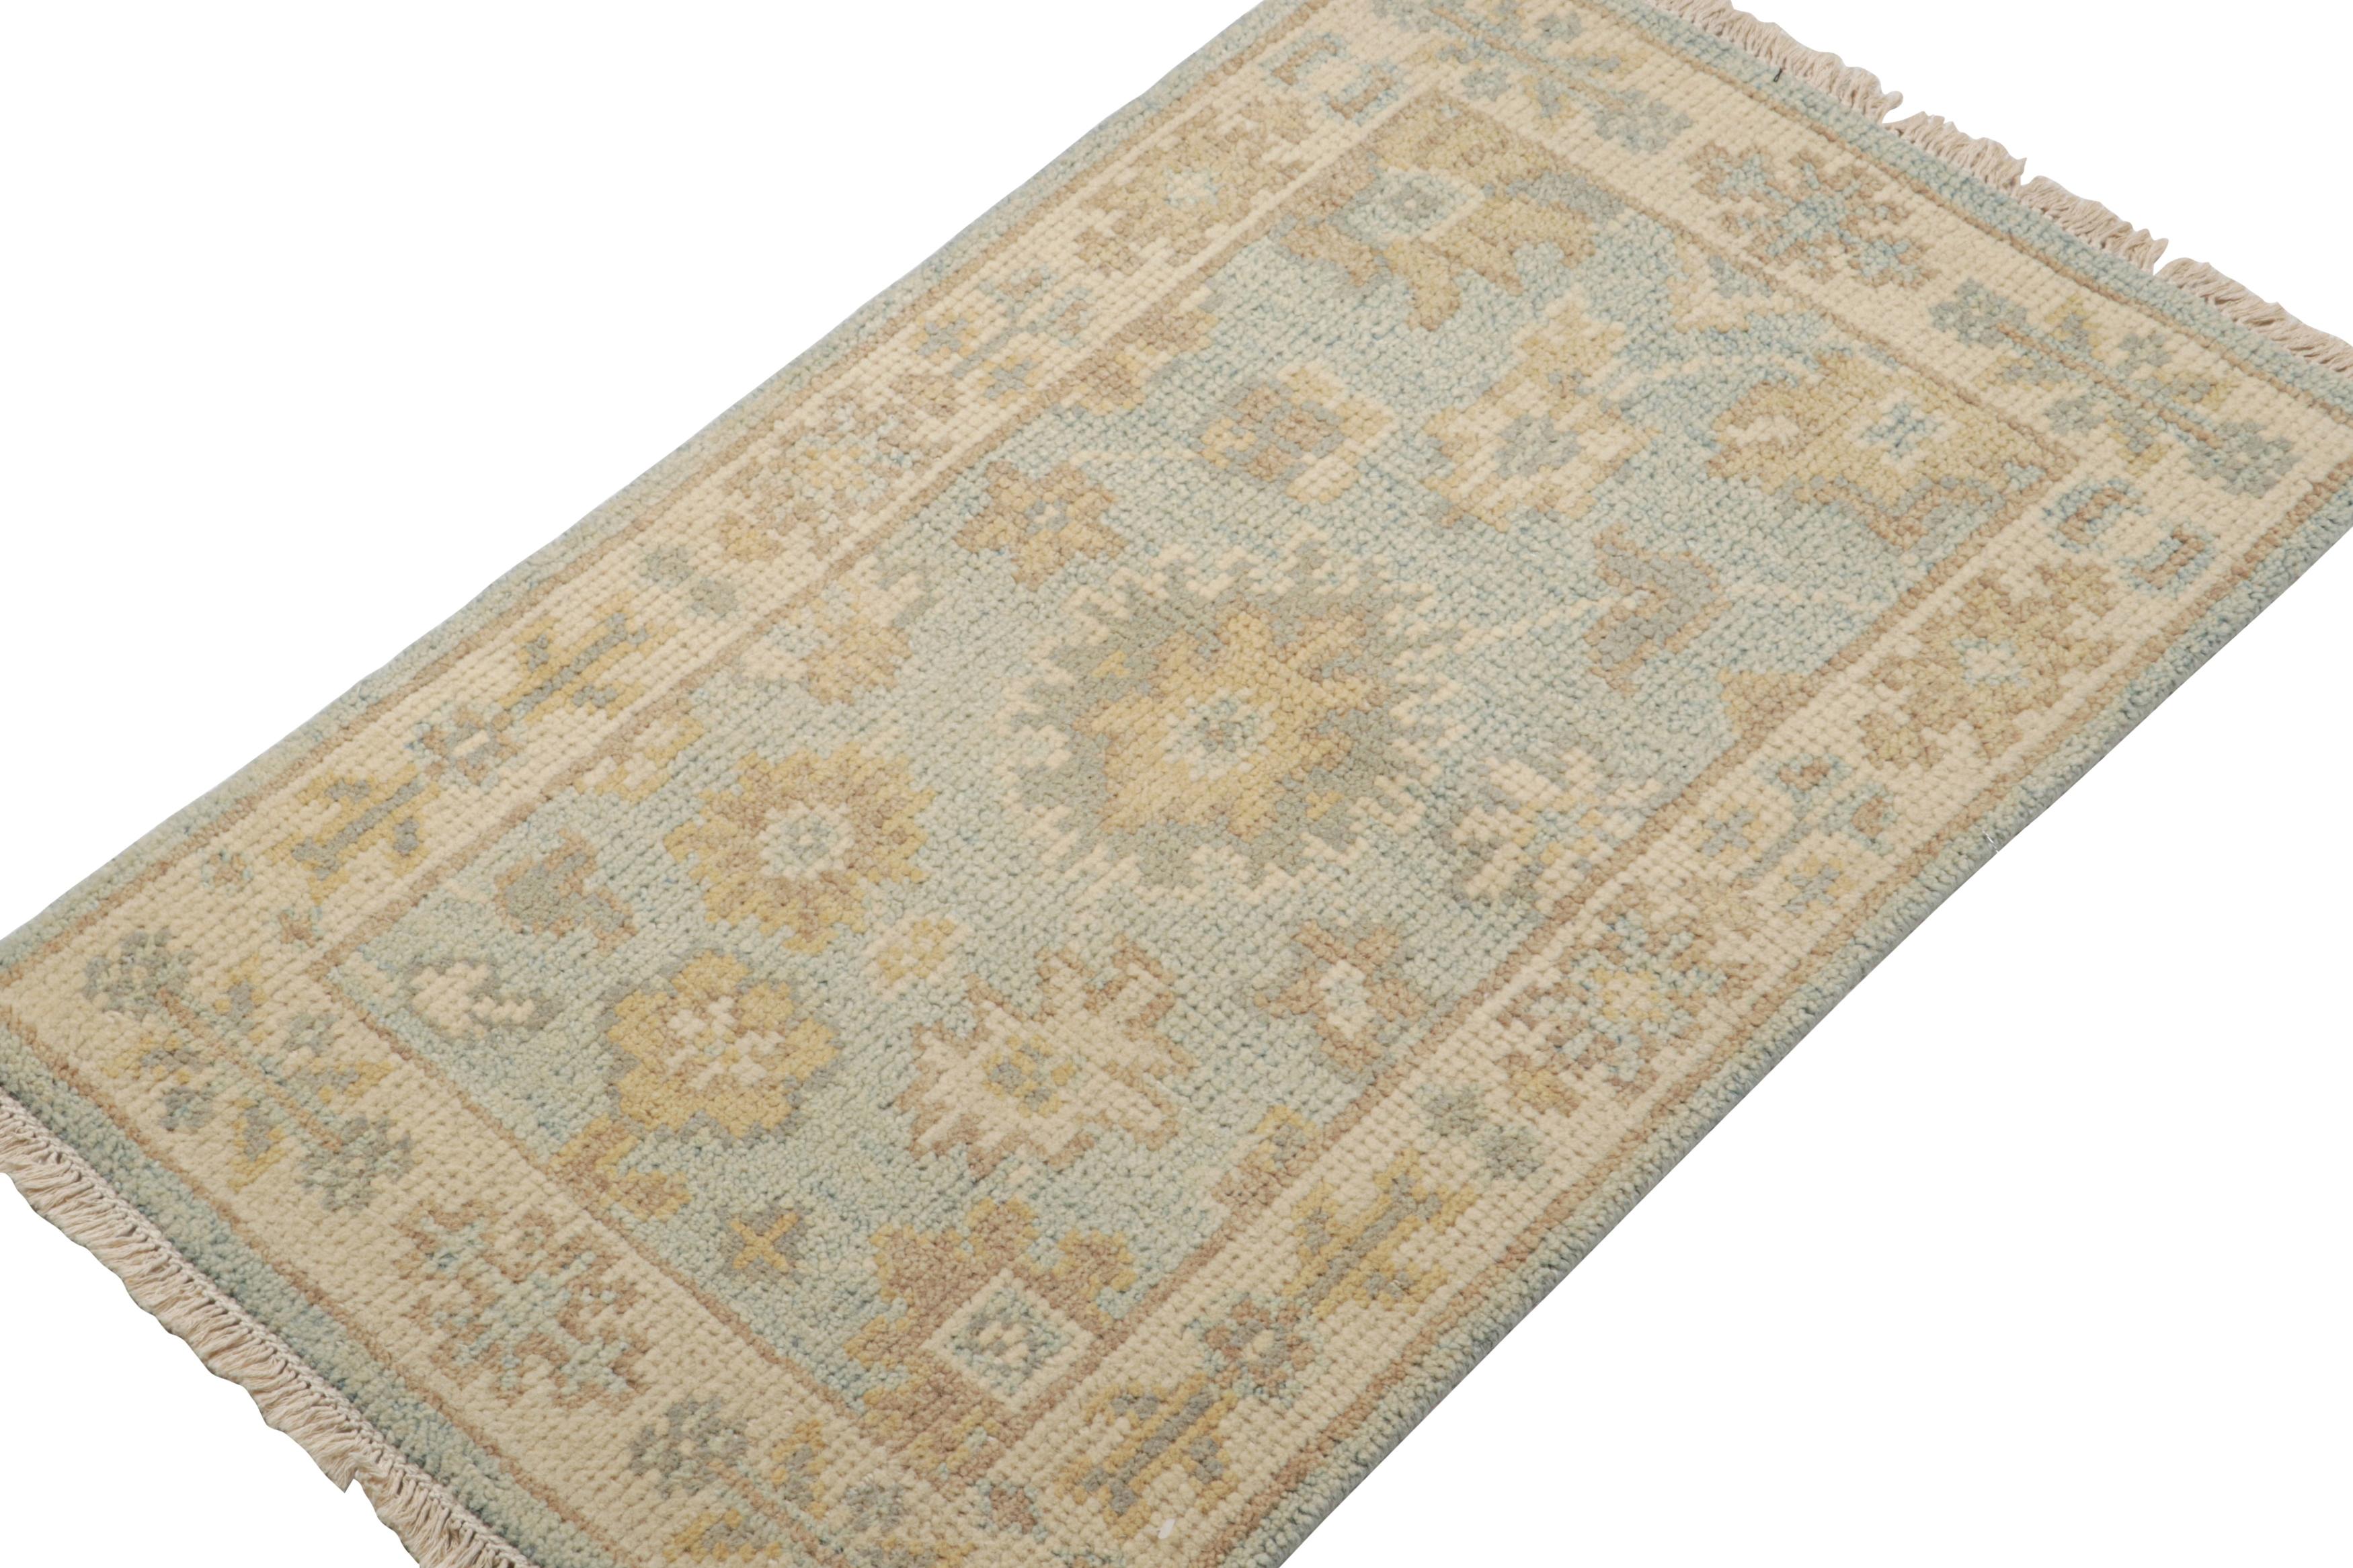 Hand-knotted in wool,  this 2x3 accent rug hails from a new unveiling of gift-sized rugs in the Oushak line of the Modern Classics collection by Rug & Kilim.

On the Design:

Inspired by titular classic rug style, this design enjoys sky blue with